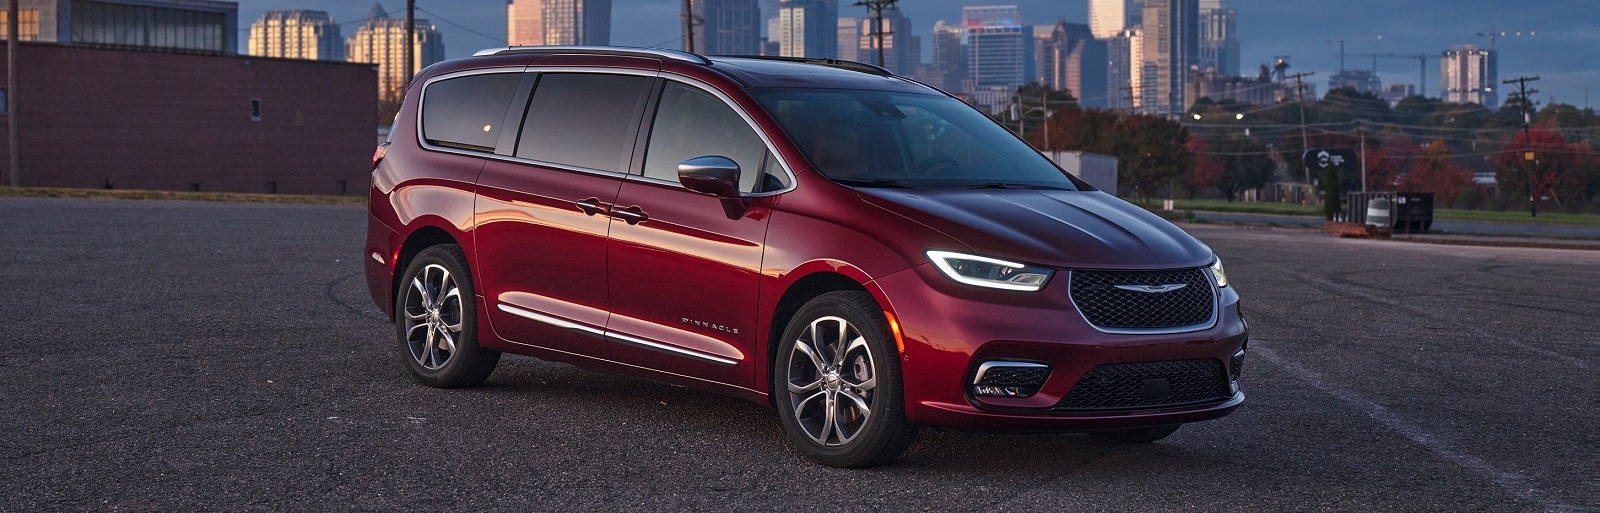 Chrysler Pacifica & Chrysler Pacifica Hybrid Towing Capacity